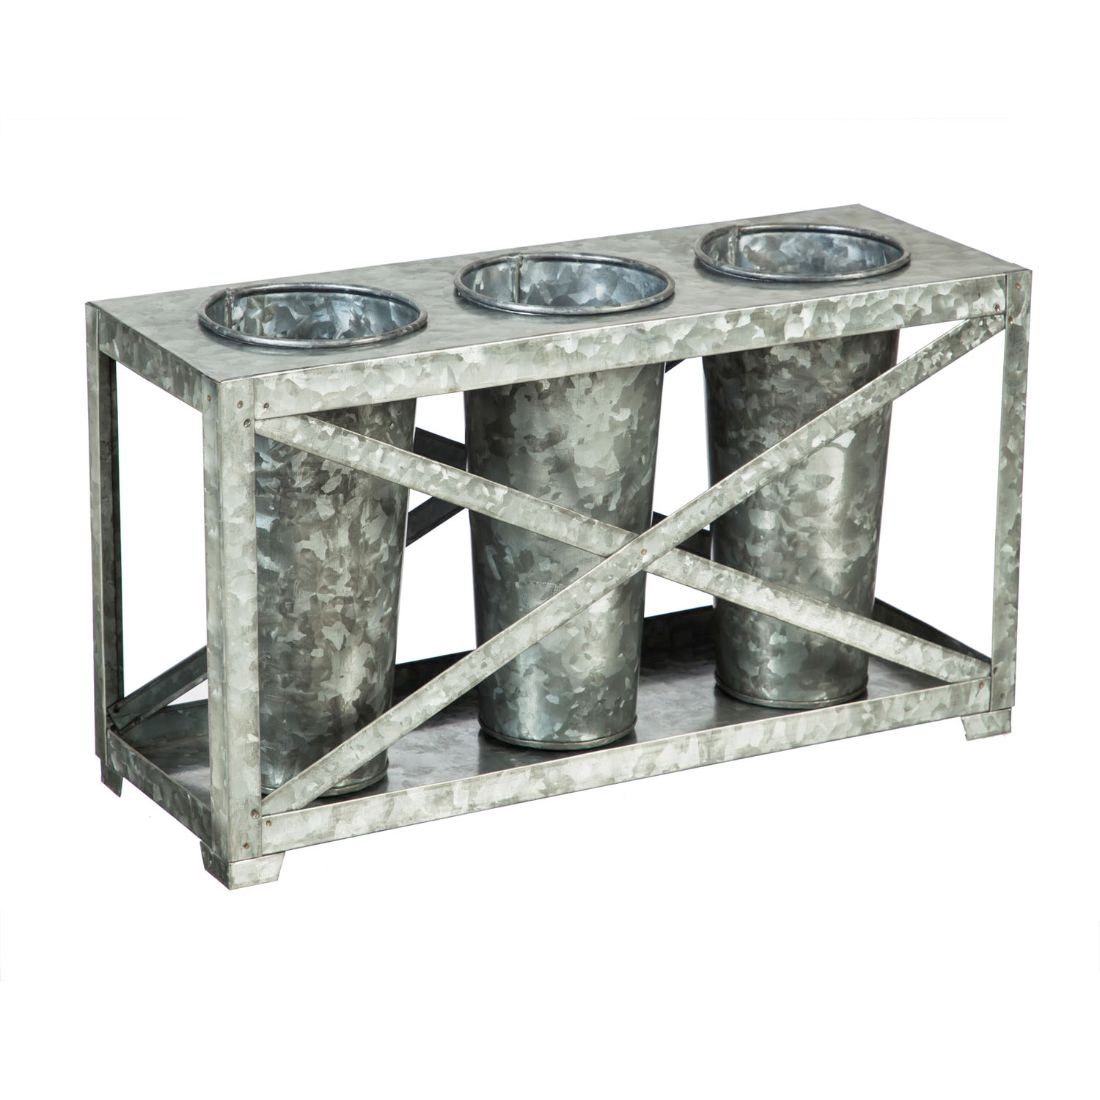 Reese Galvanized Planters in Metal Frame